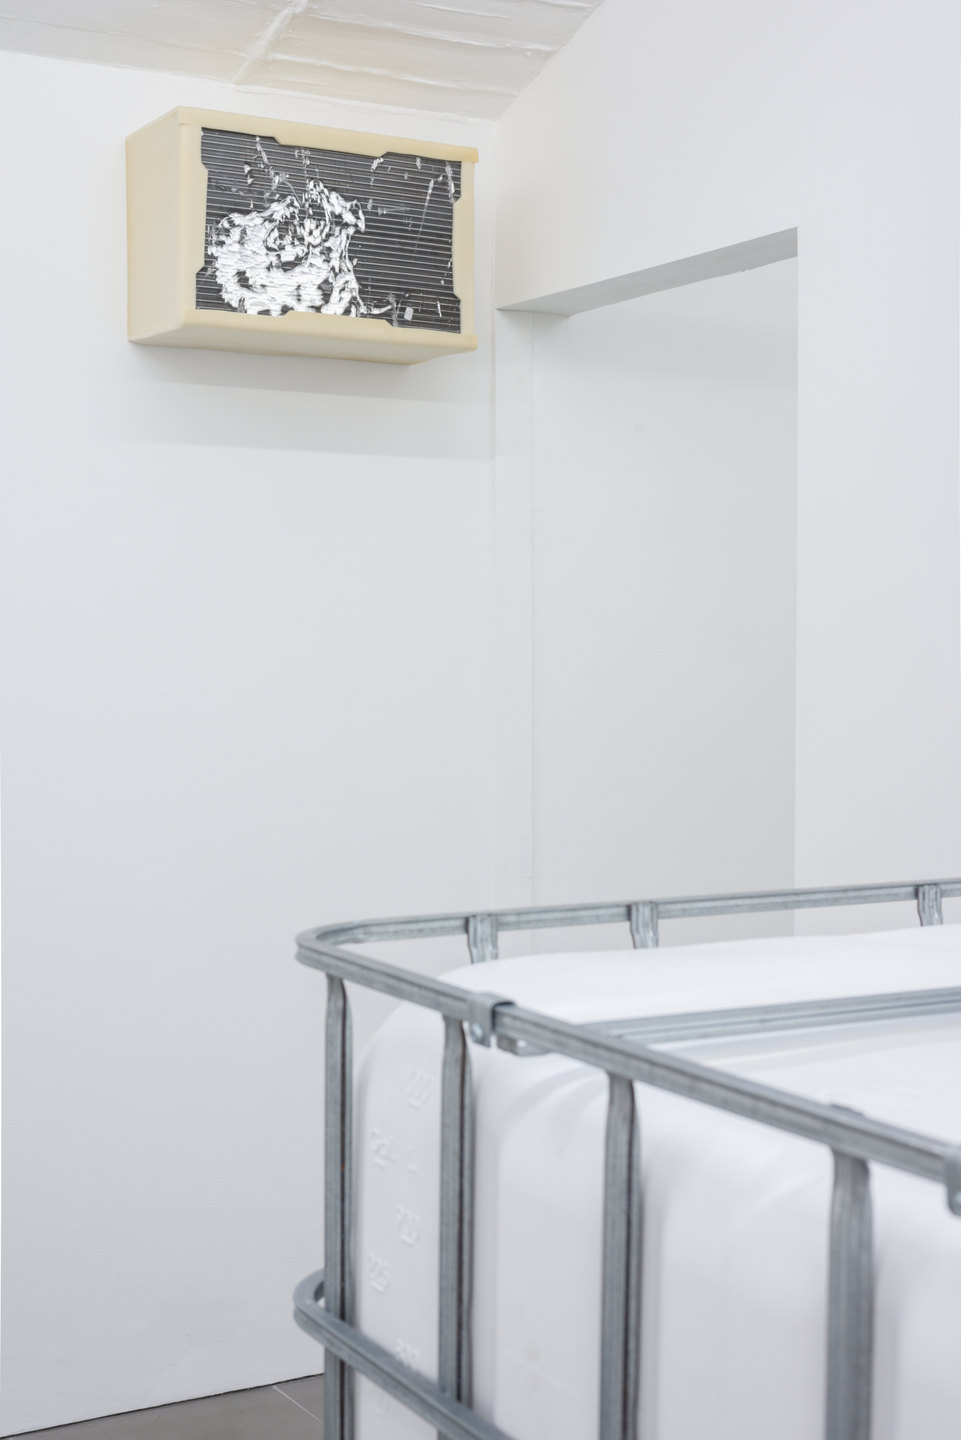 Anastasia Sosunova, 'Dog Fight', Cell Project Space 2022